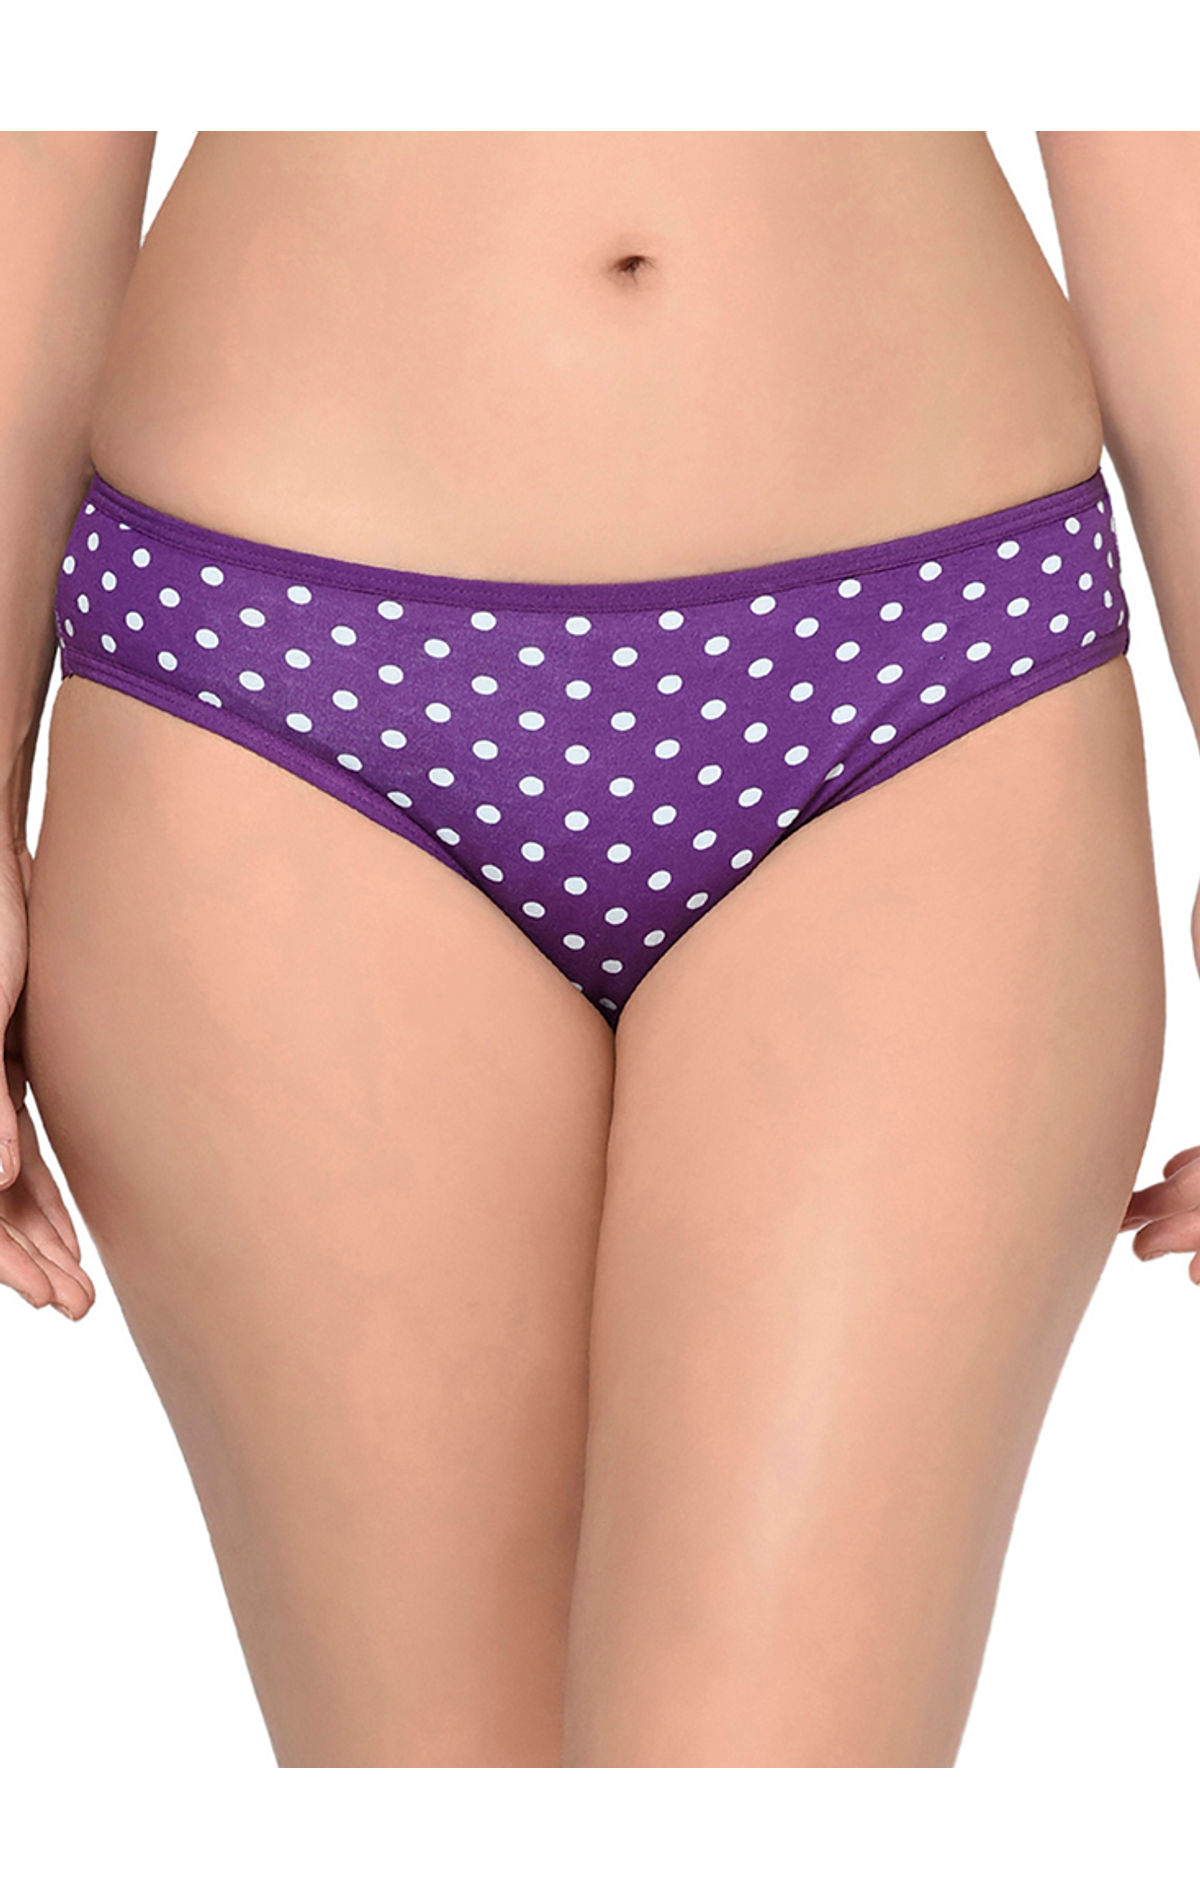 Bodycare Pack Of 3 Printed Panty In Assorted Colors-8557b-3pcs, 8557b-3pcs